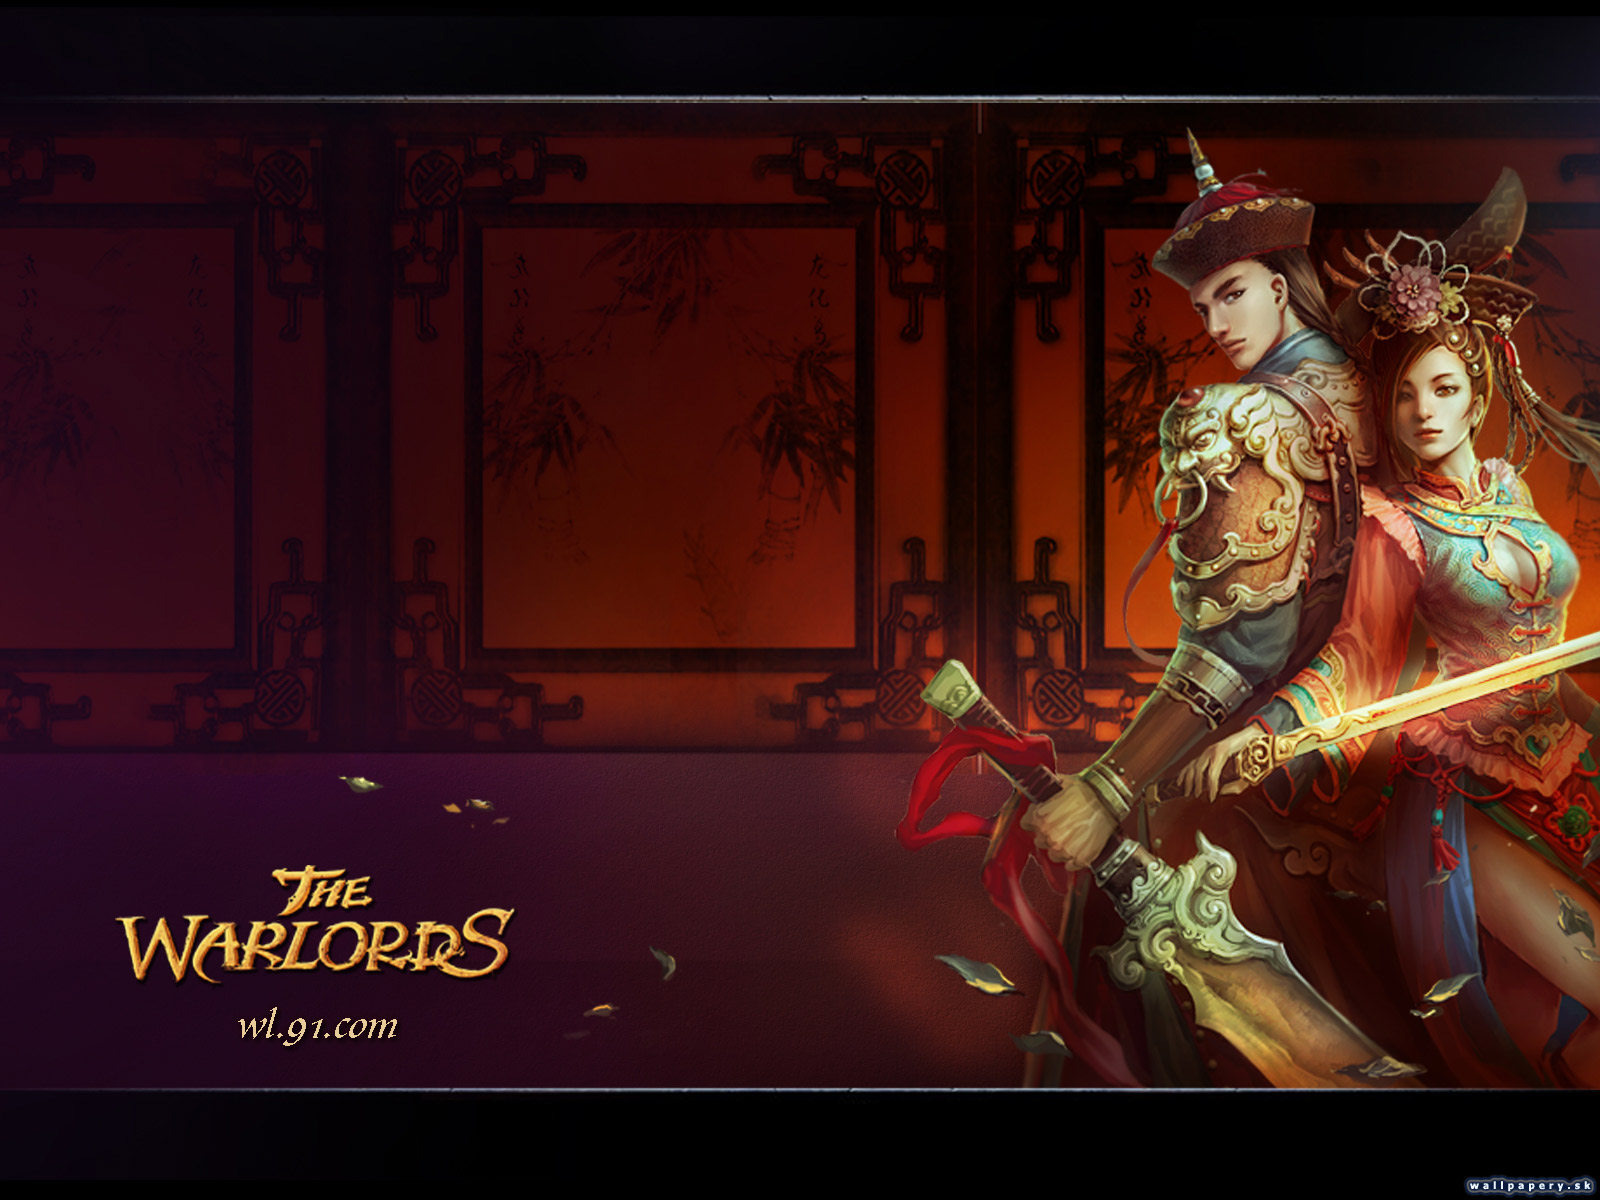 The Warlords - wallpaper 11